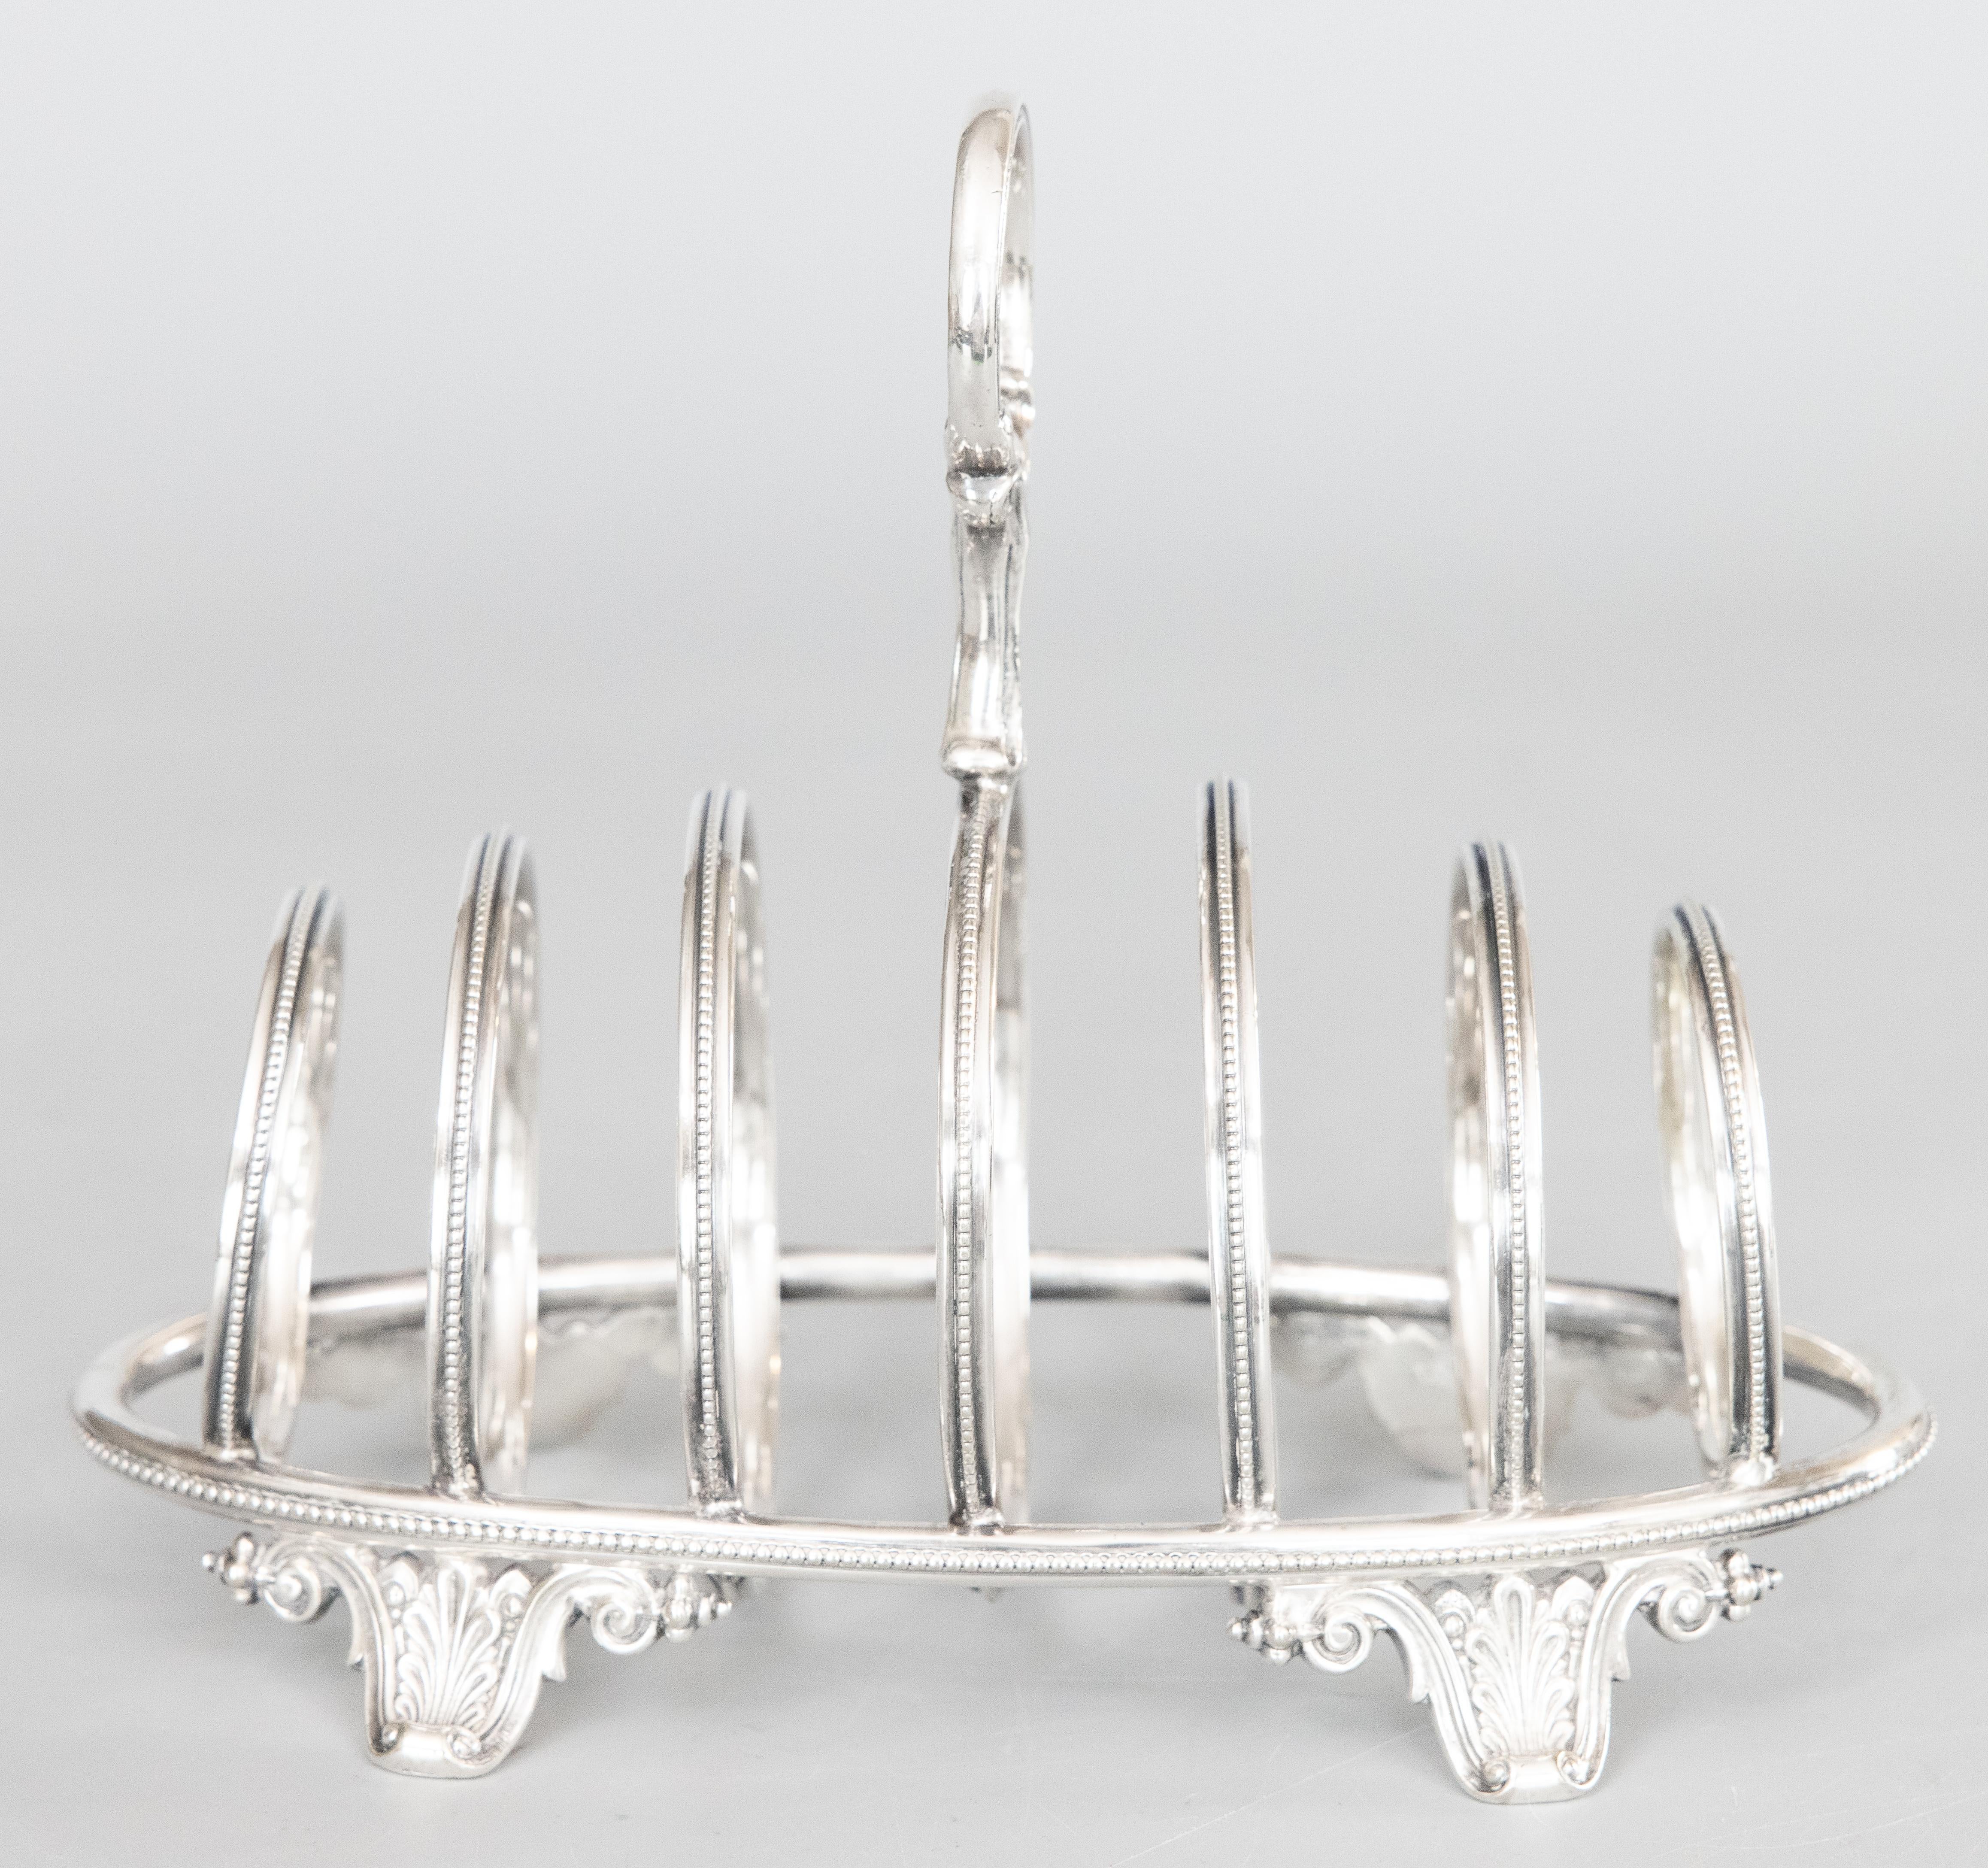 Antique Art Deco English Silver Plate Toast Rack, circa 1900 In Good Condition For Sale In Pearland, TX